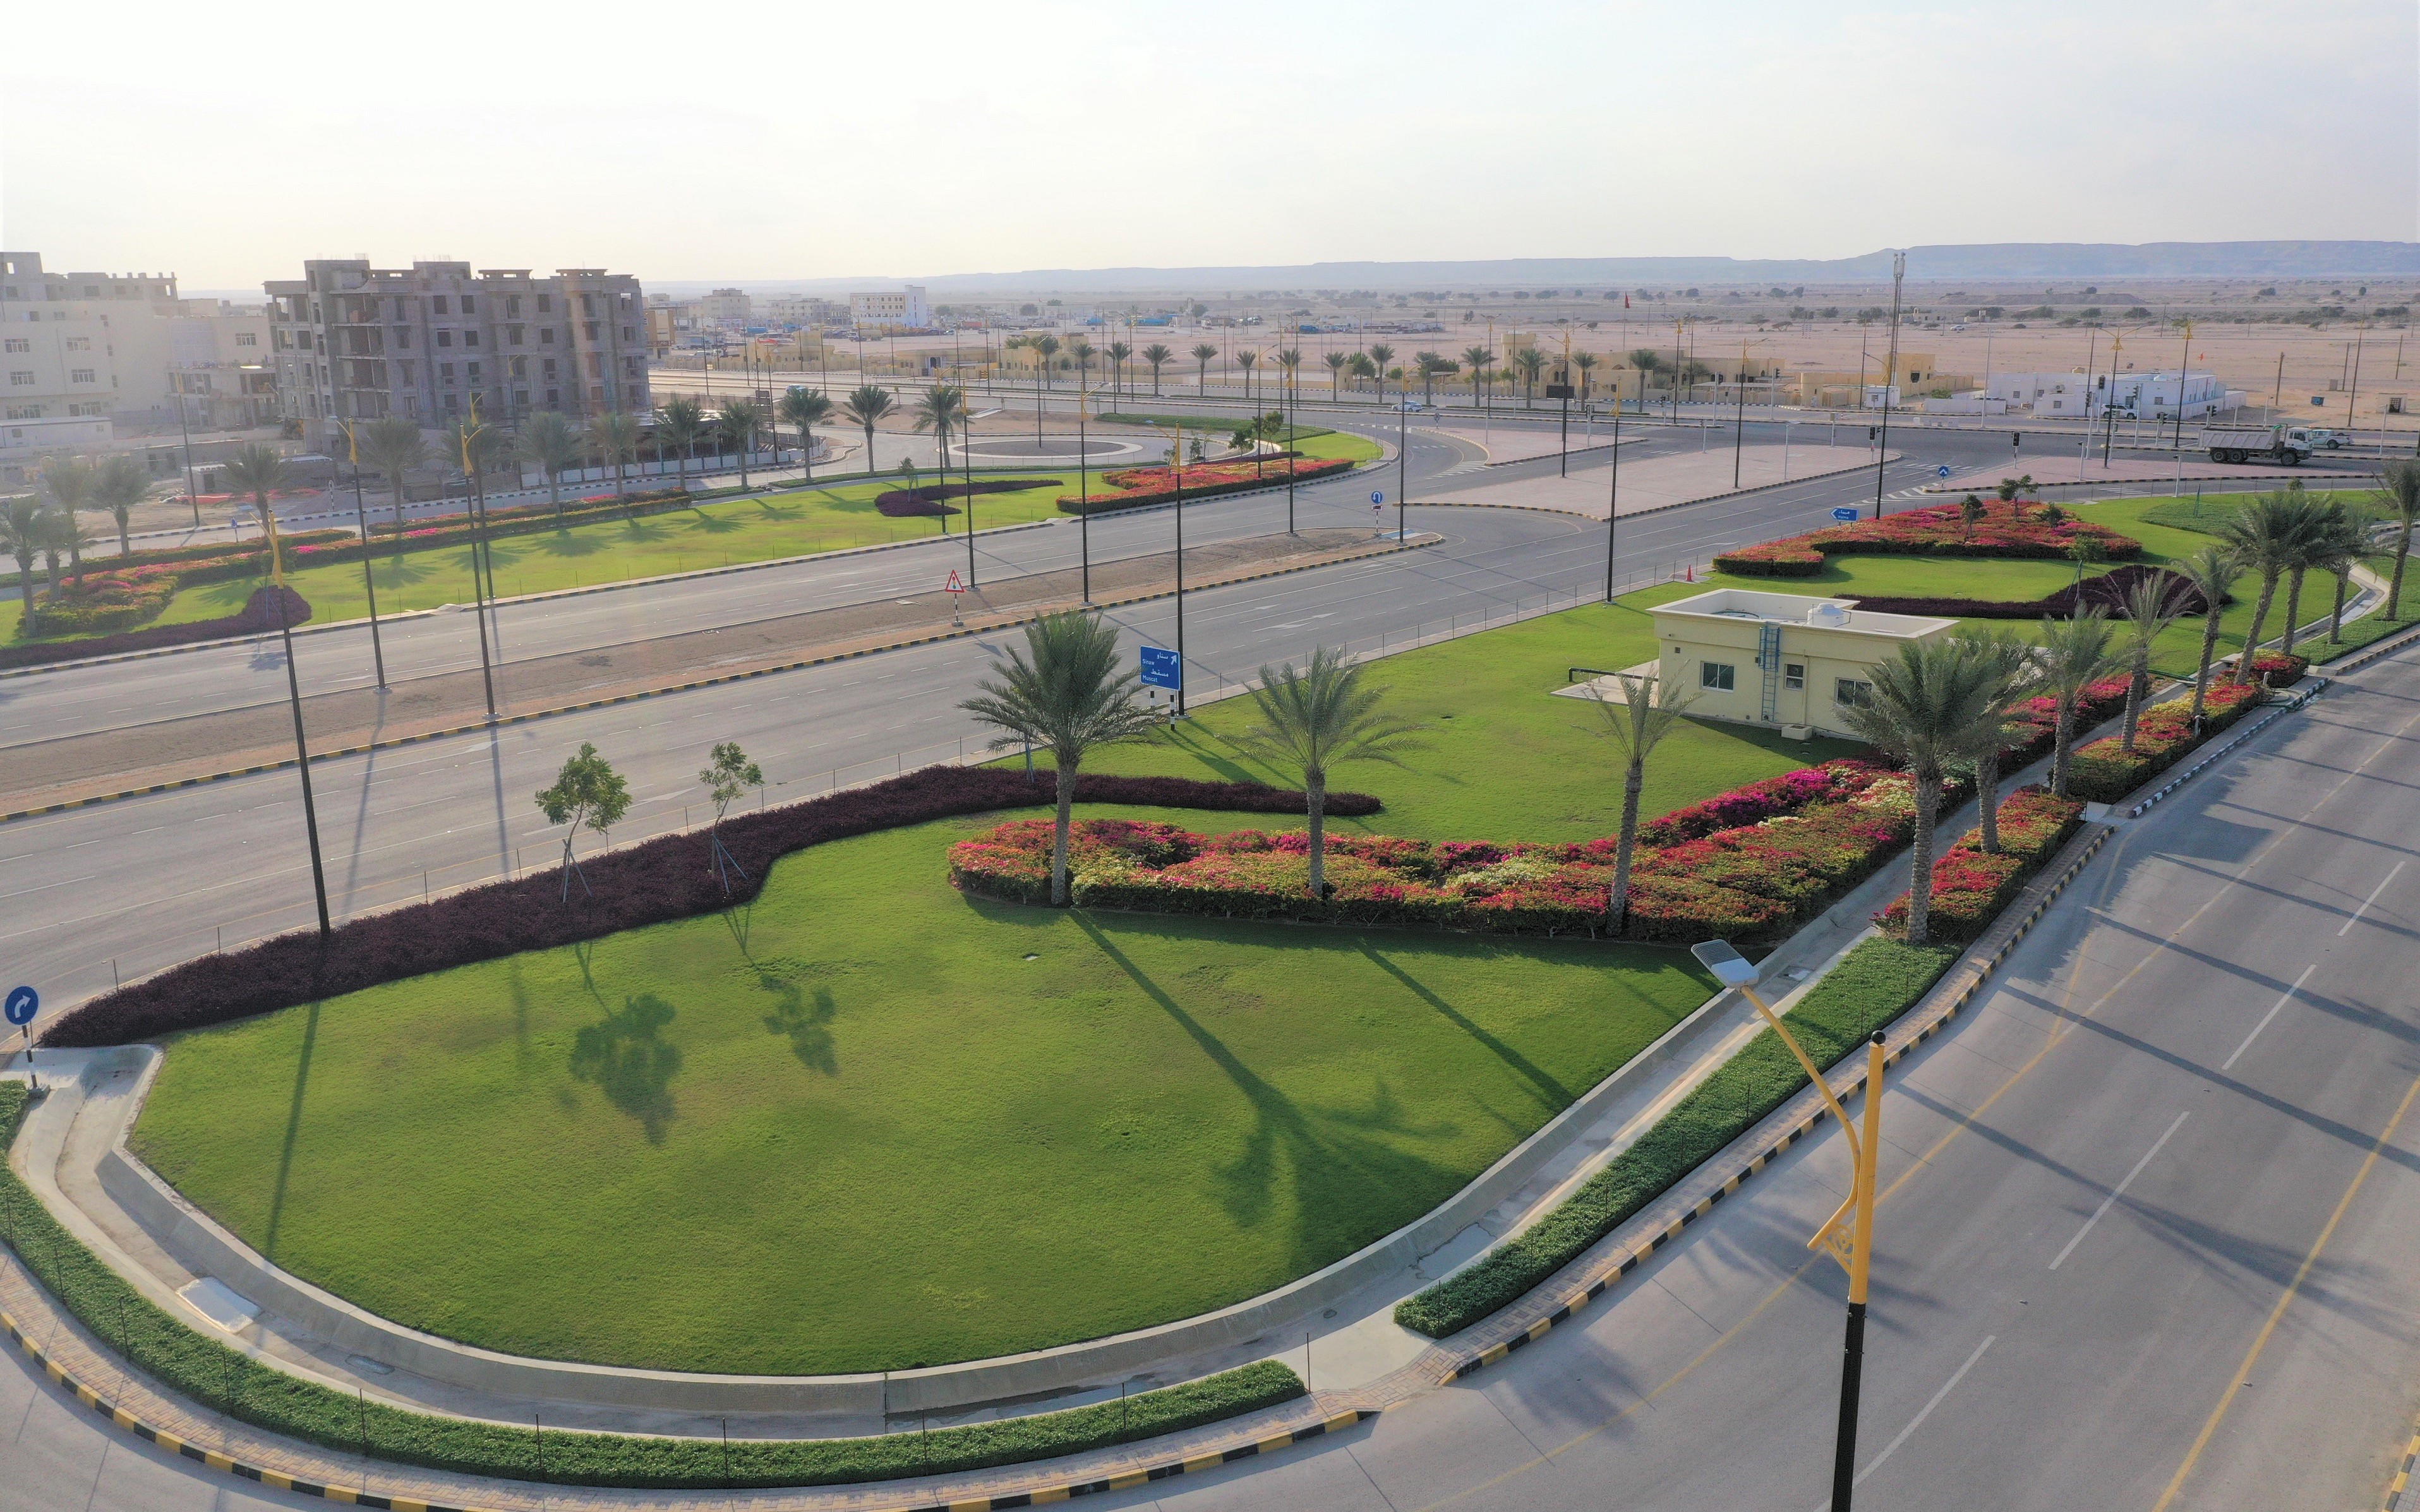 SEZAD completes 67% of its planting 5,000 trees project